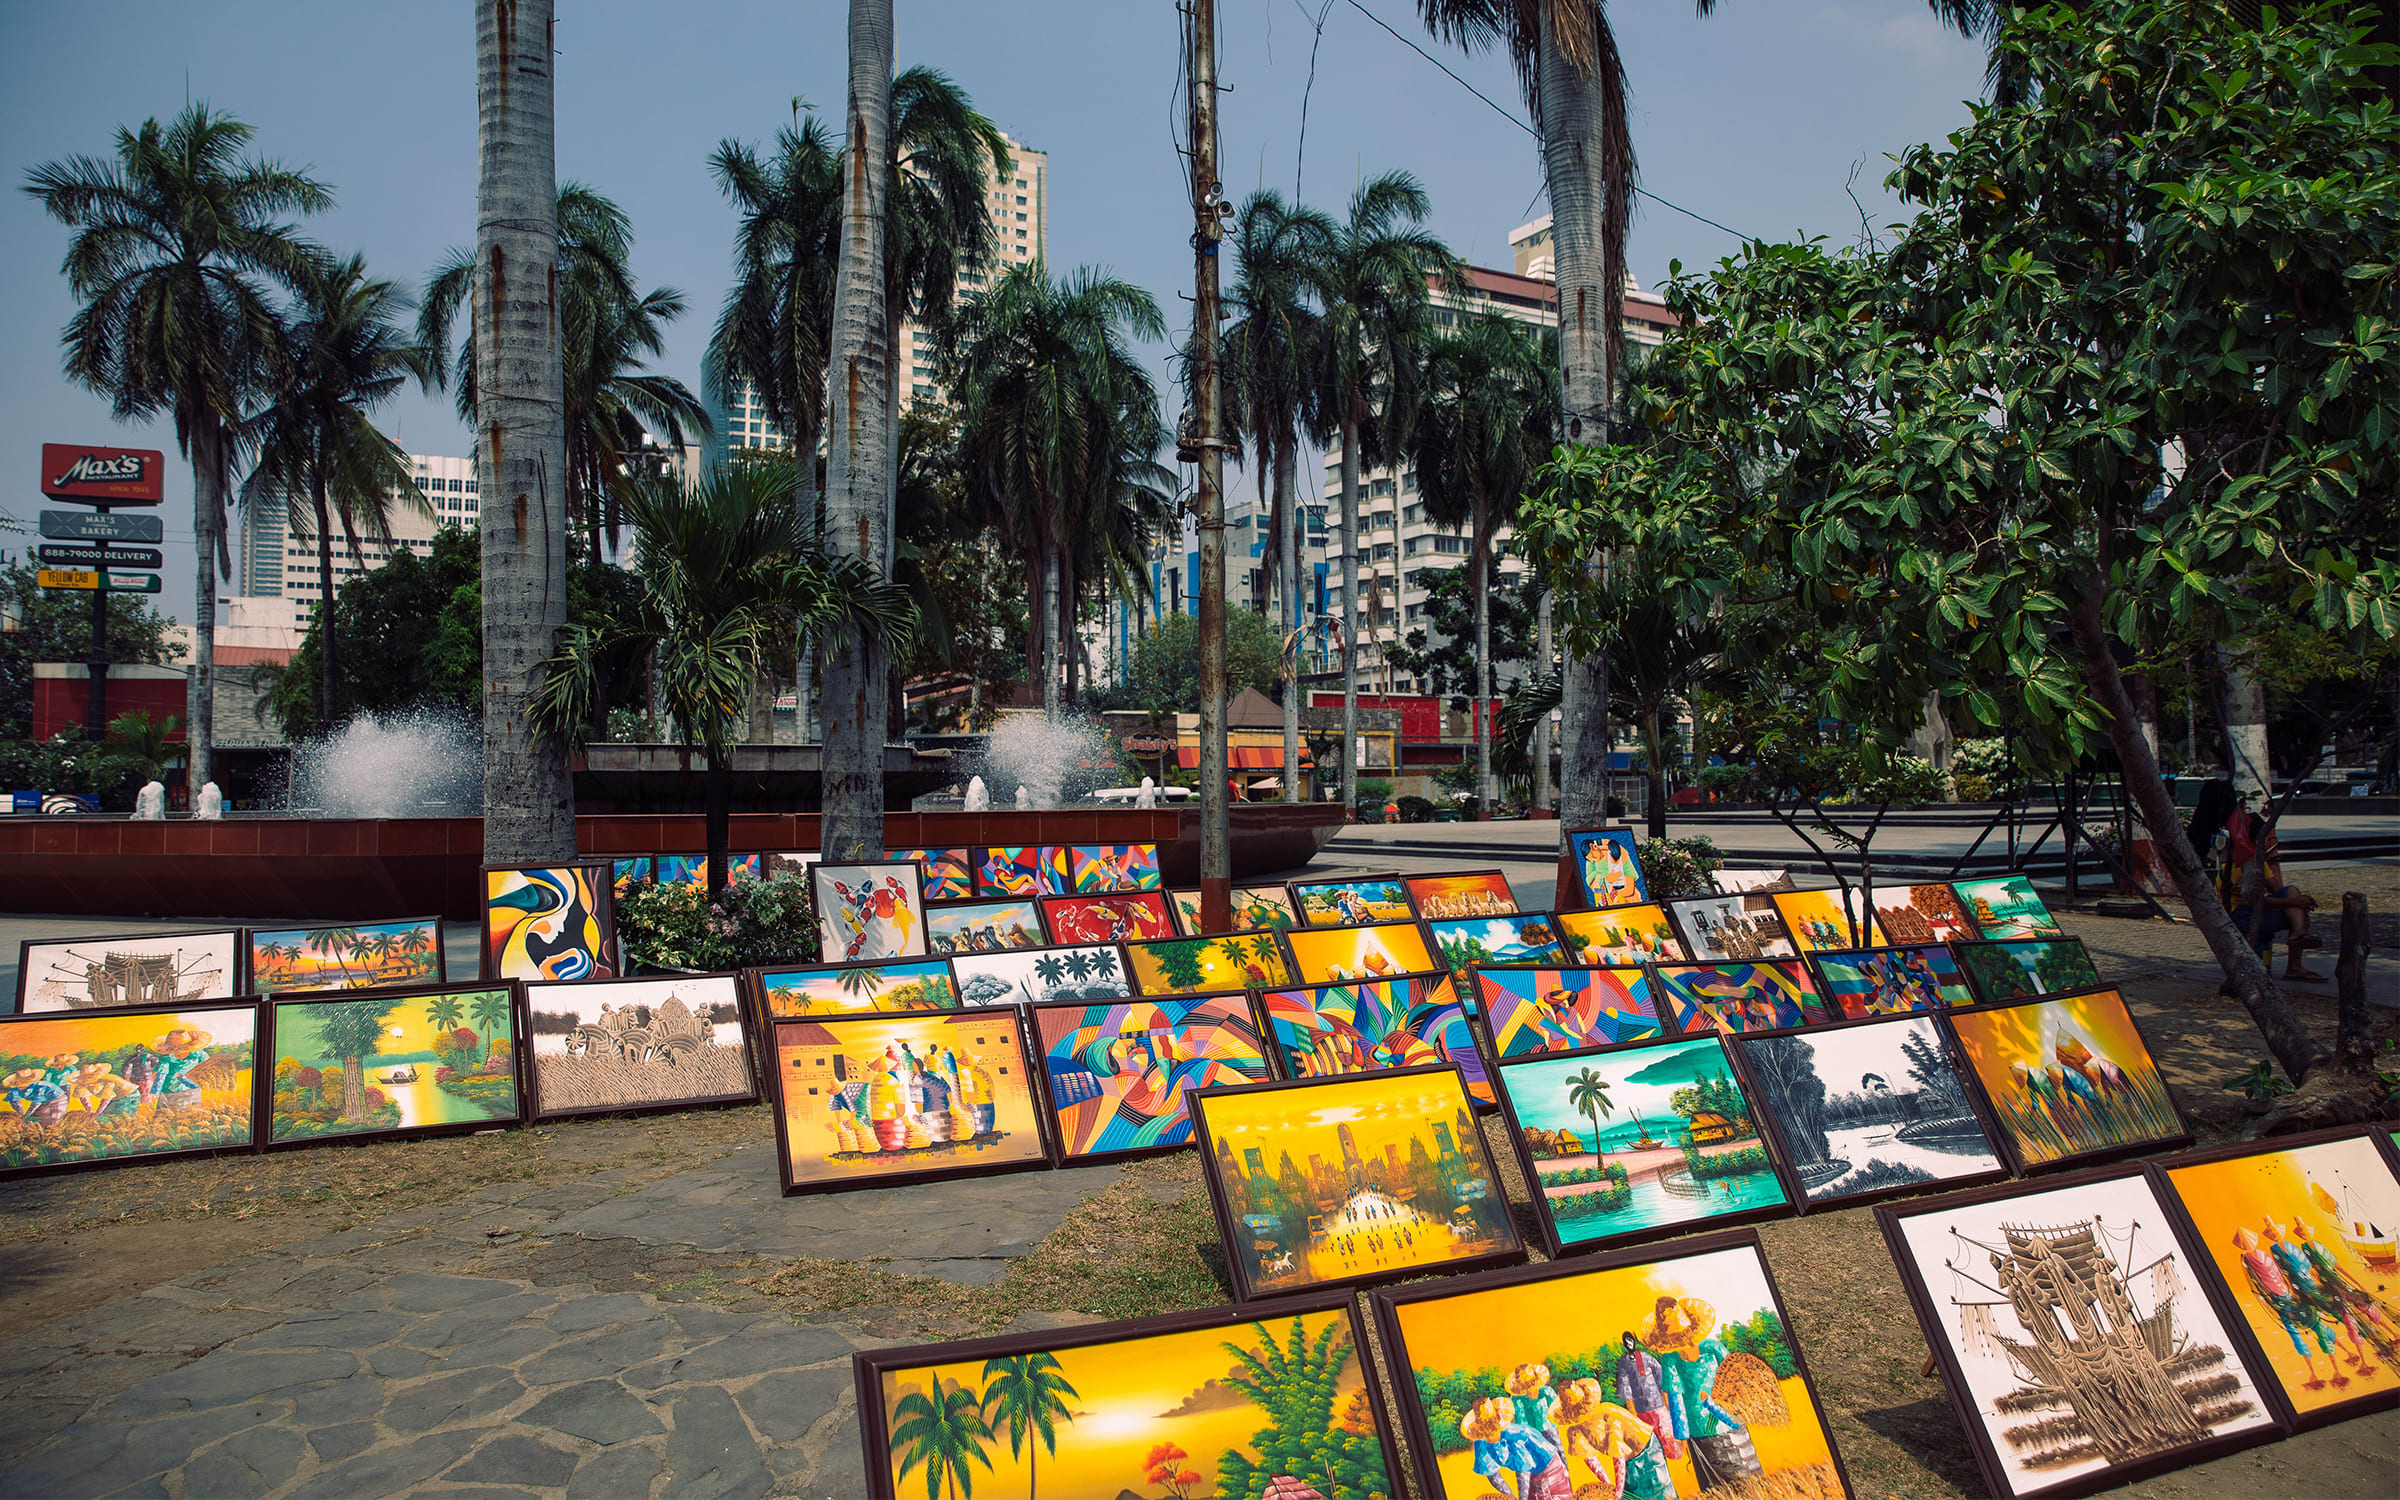 A view of Mabini Street. Photo by Joseph Pascual for Art Basel.